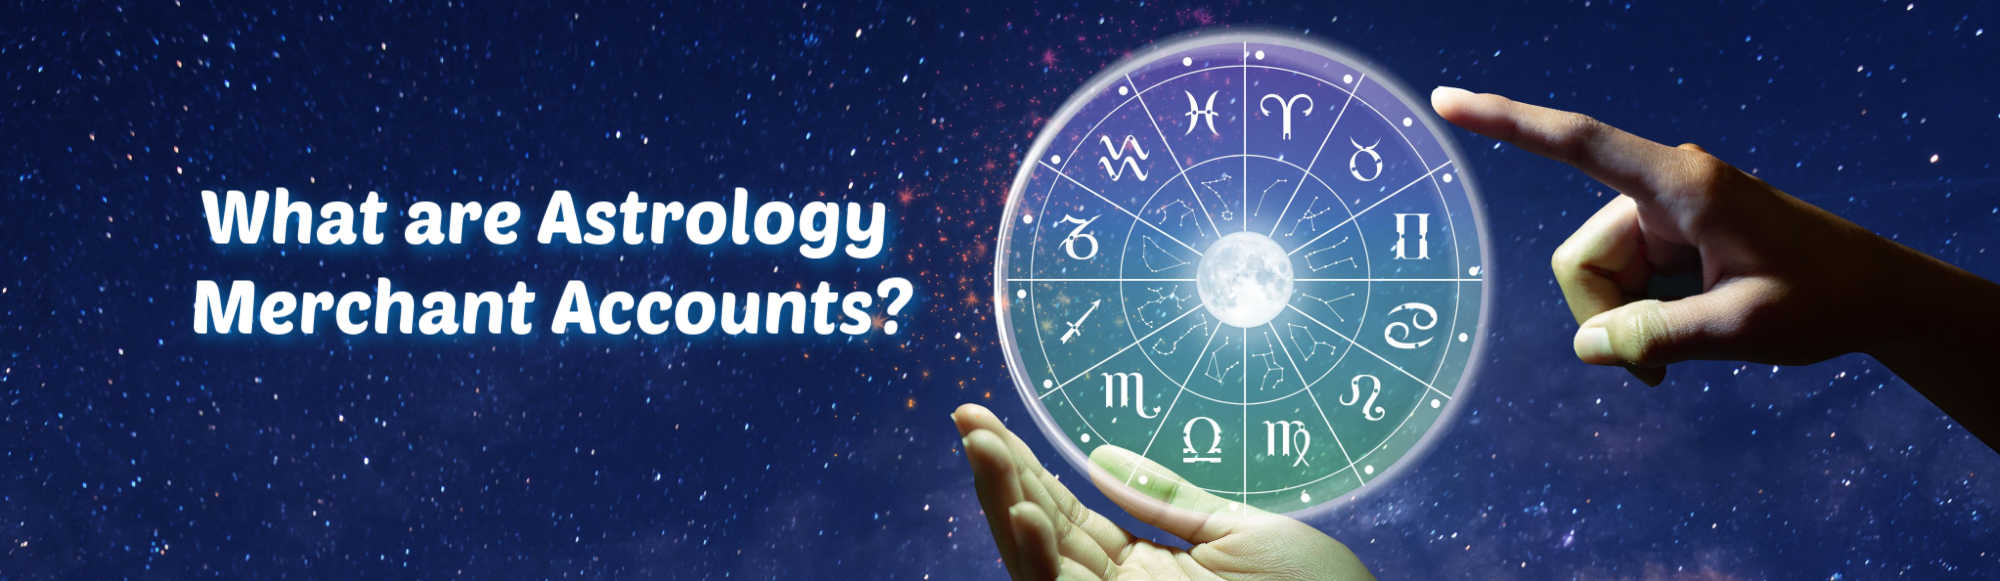 image of what are astrology merchant accounts